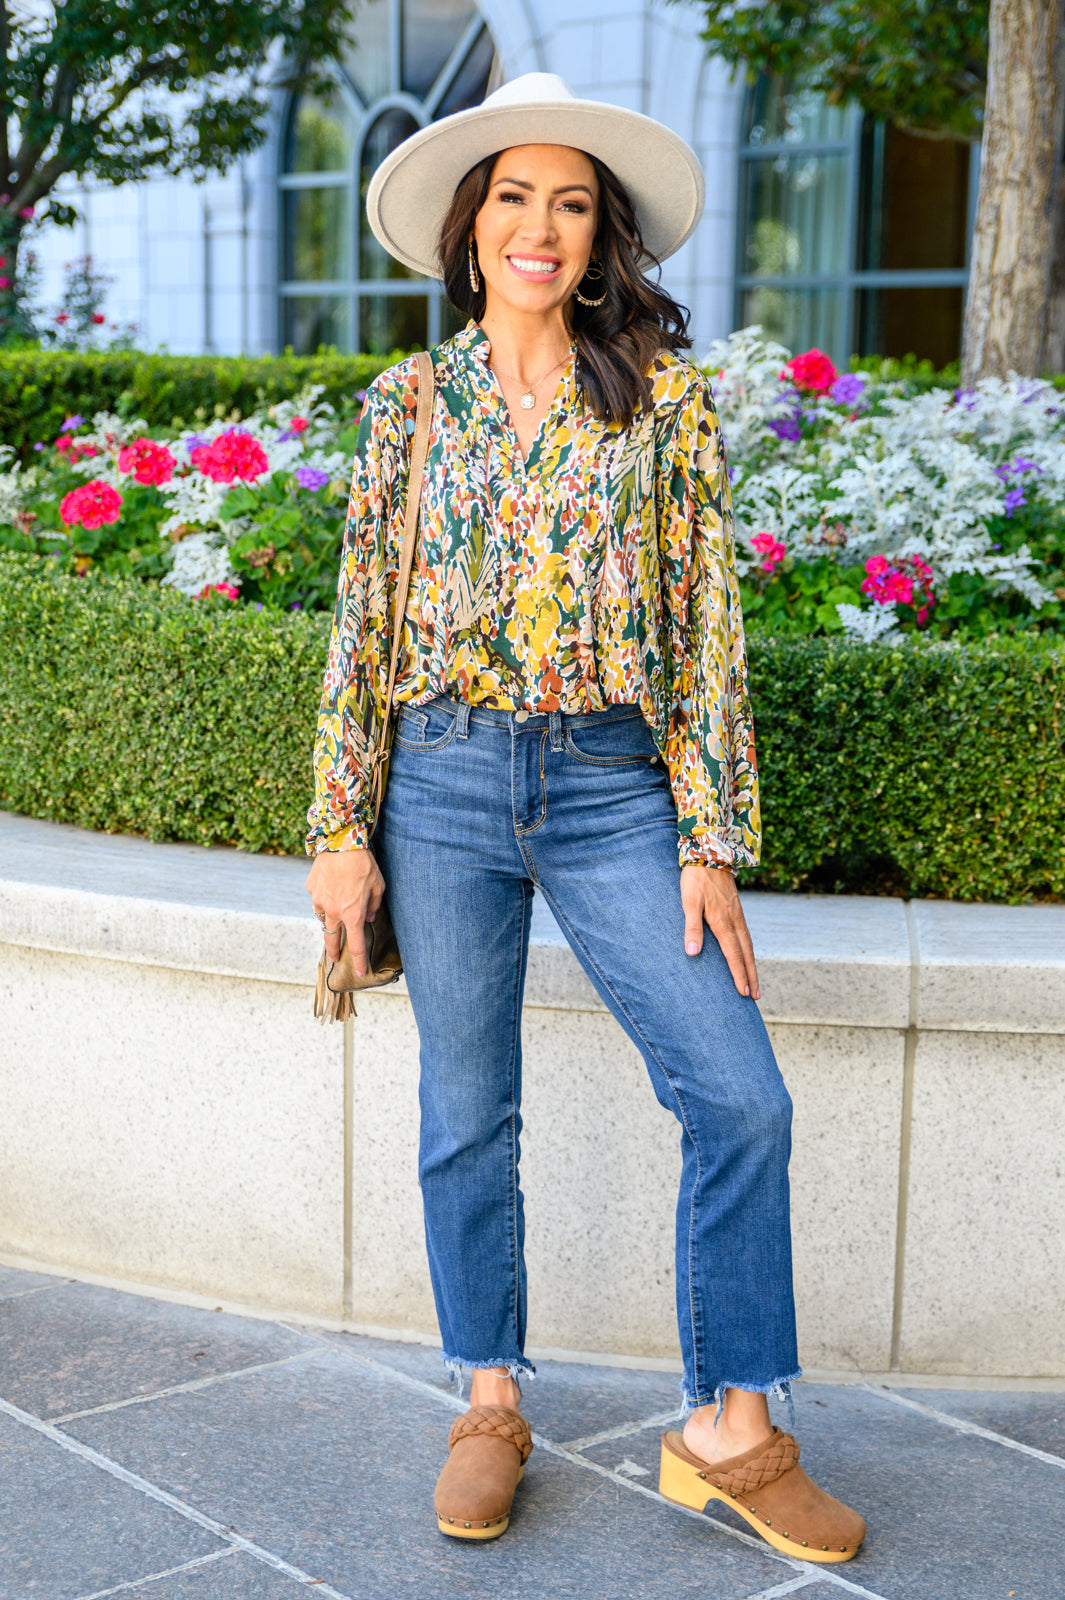 Lilly Ann Floral Print Blouse Ave Shops